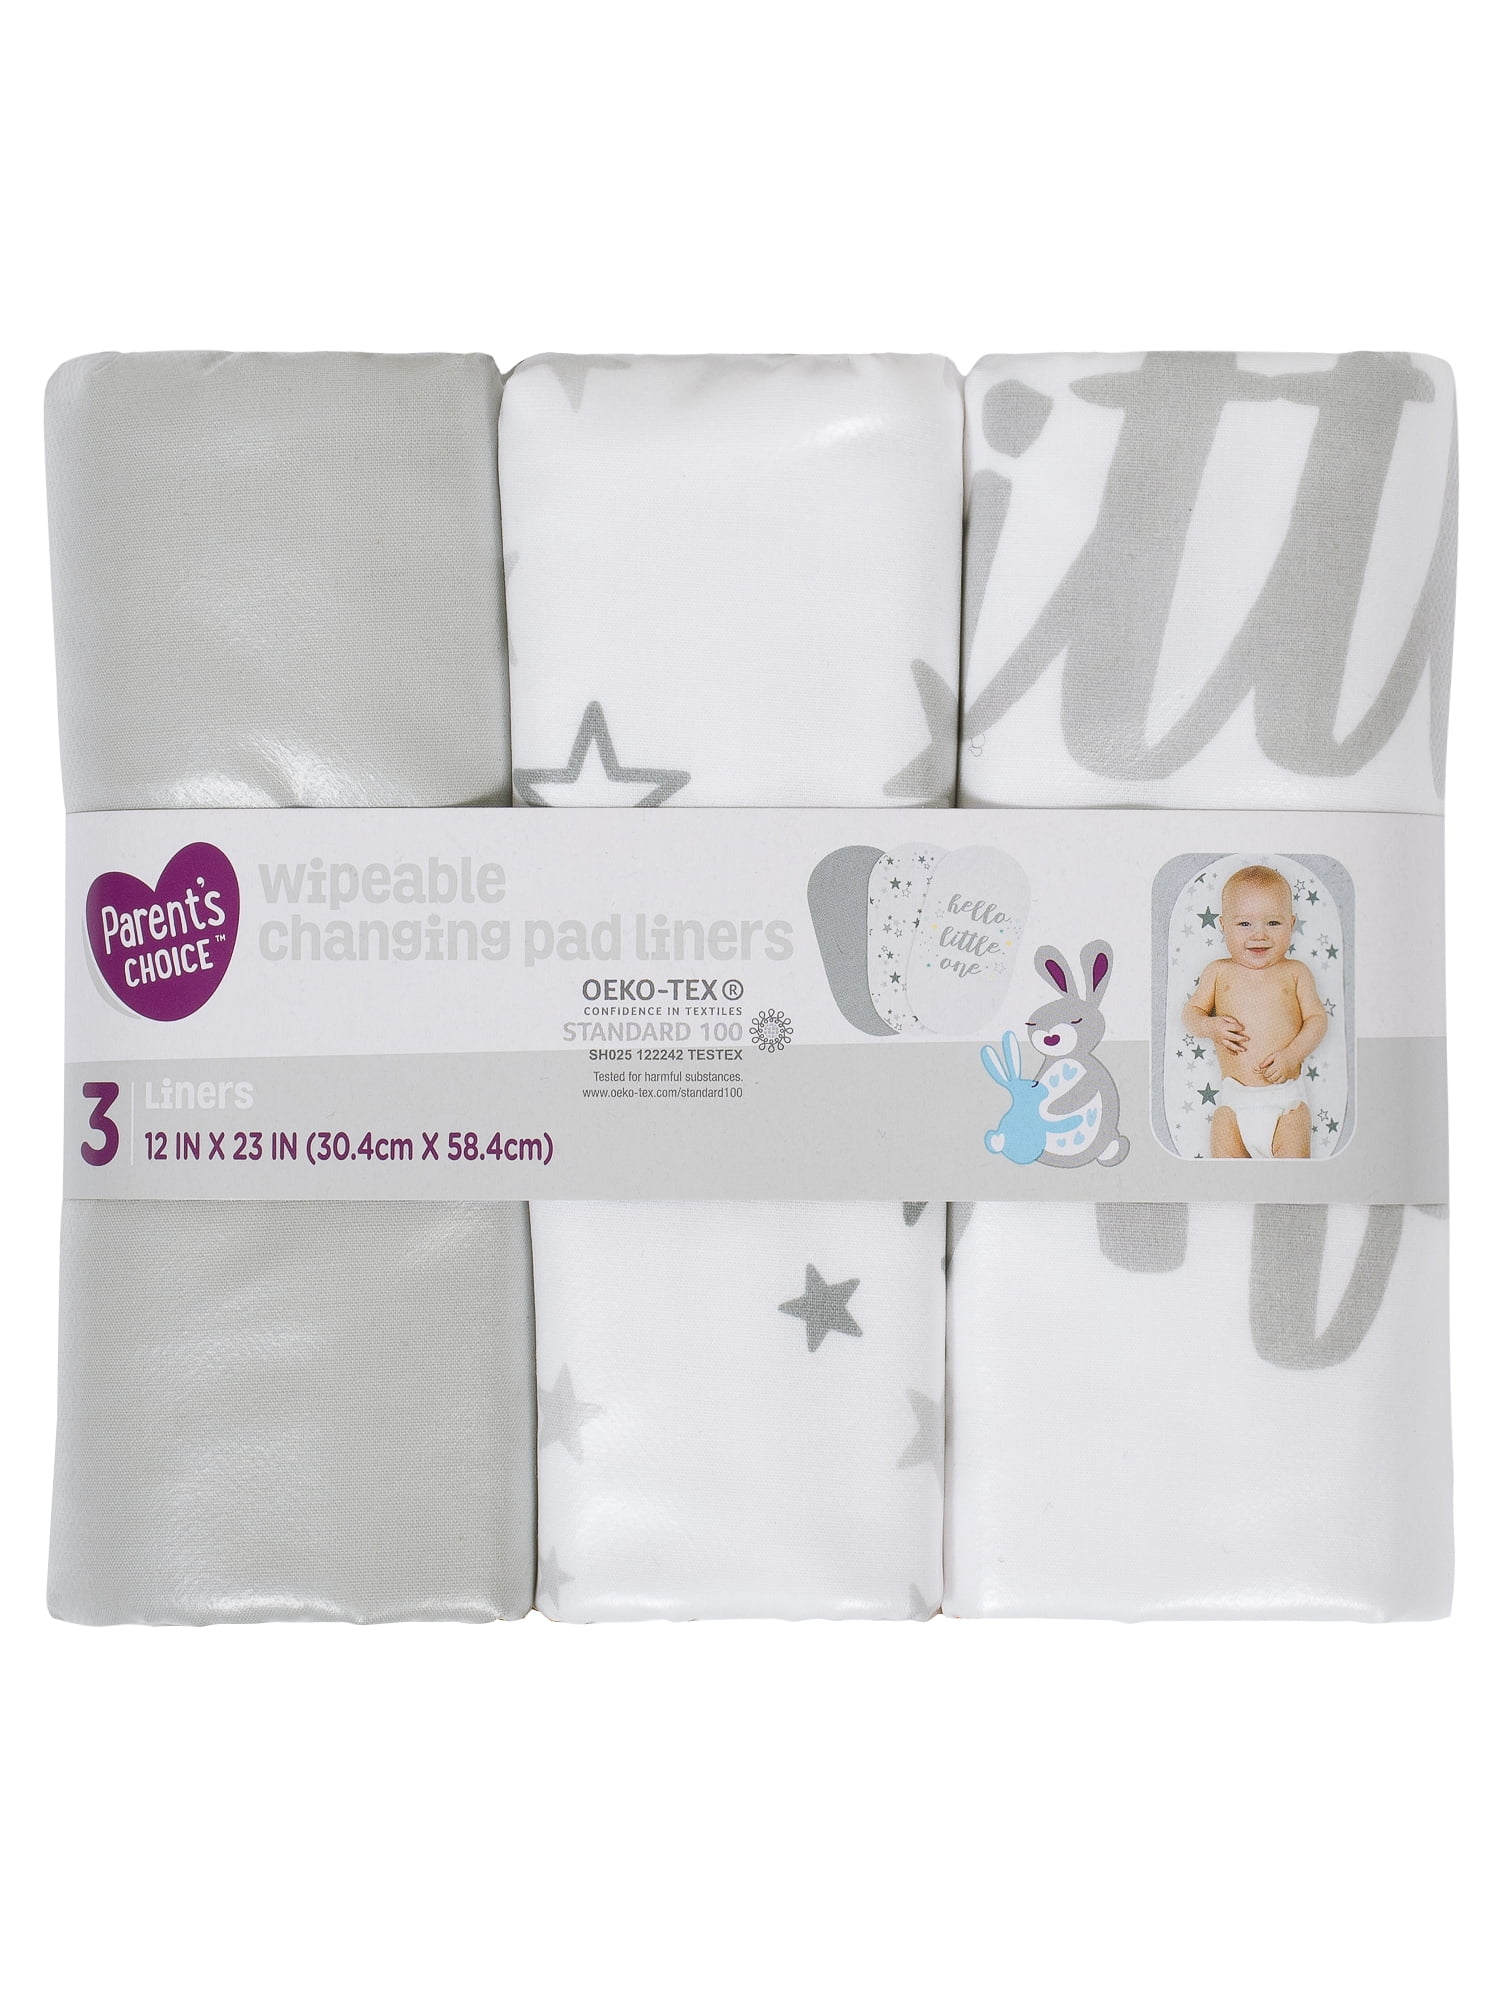 Parent's Choice NWT 3 pack Wipeable Changing Pad Liners 12 inches x 23 inches 